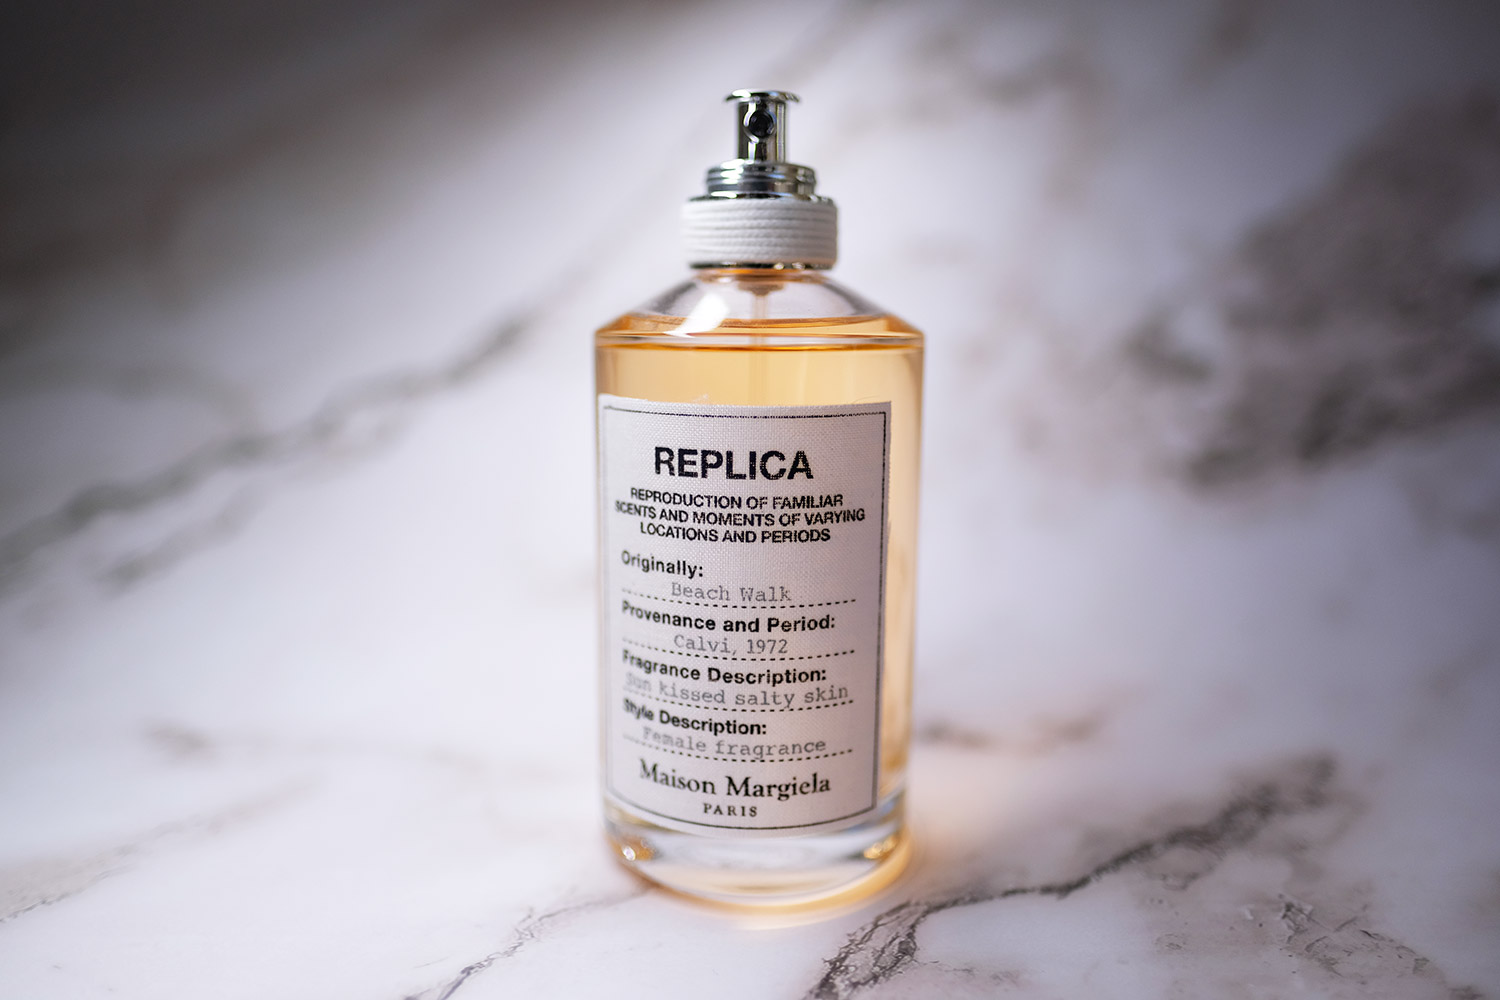 Replica Beach Walk: review of this fragrance by Maison Margiela